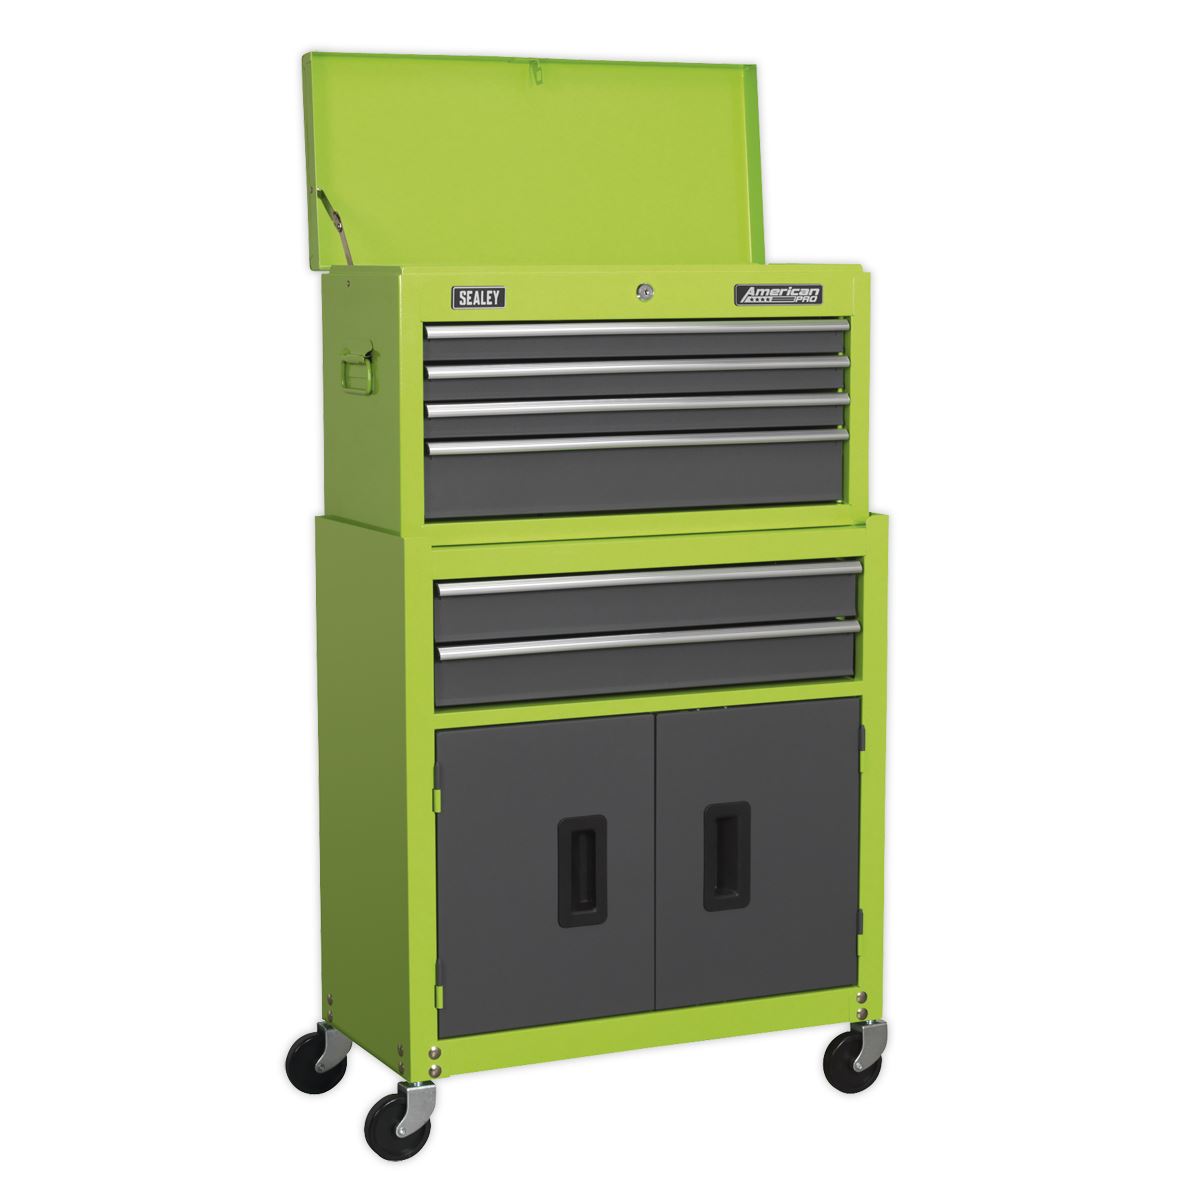 Sealey American Pro Topchest & Rollcab Combination 6 Drawer with Ball-Bearing Slides - Green/Grey